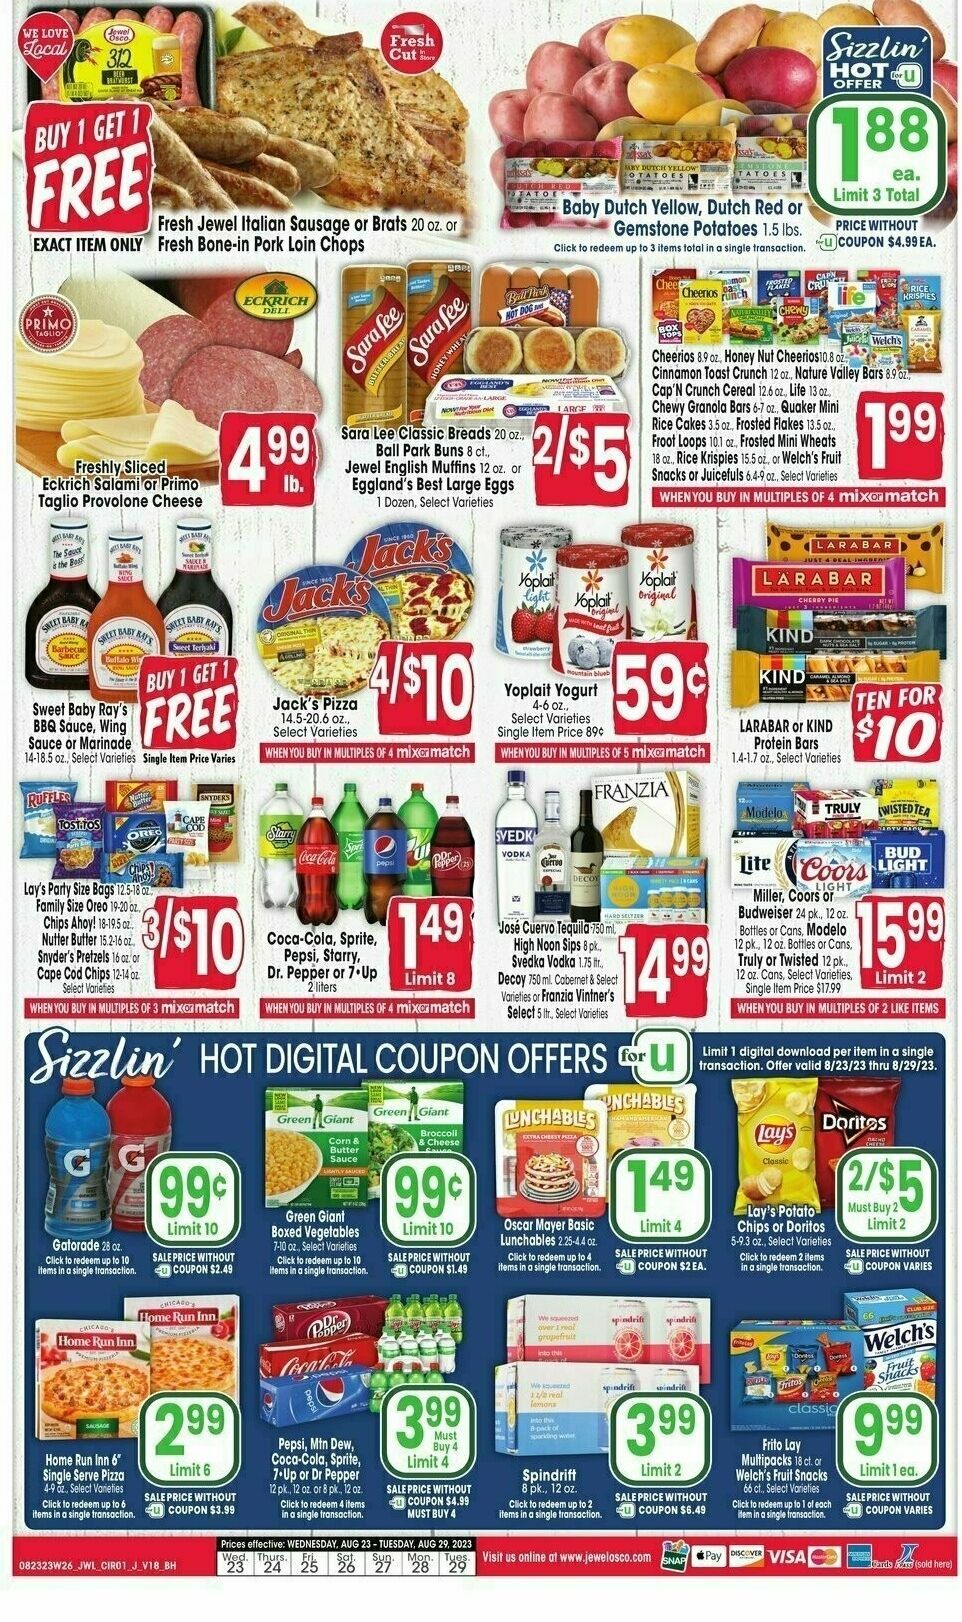 Jewel Osco Weekly Ad from August 23